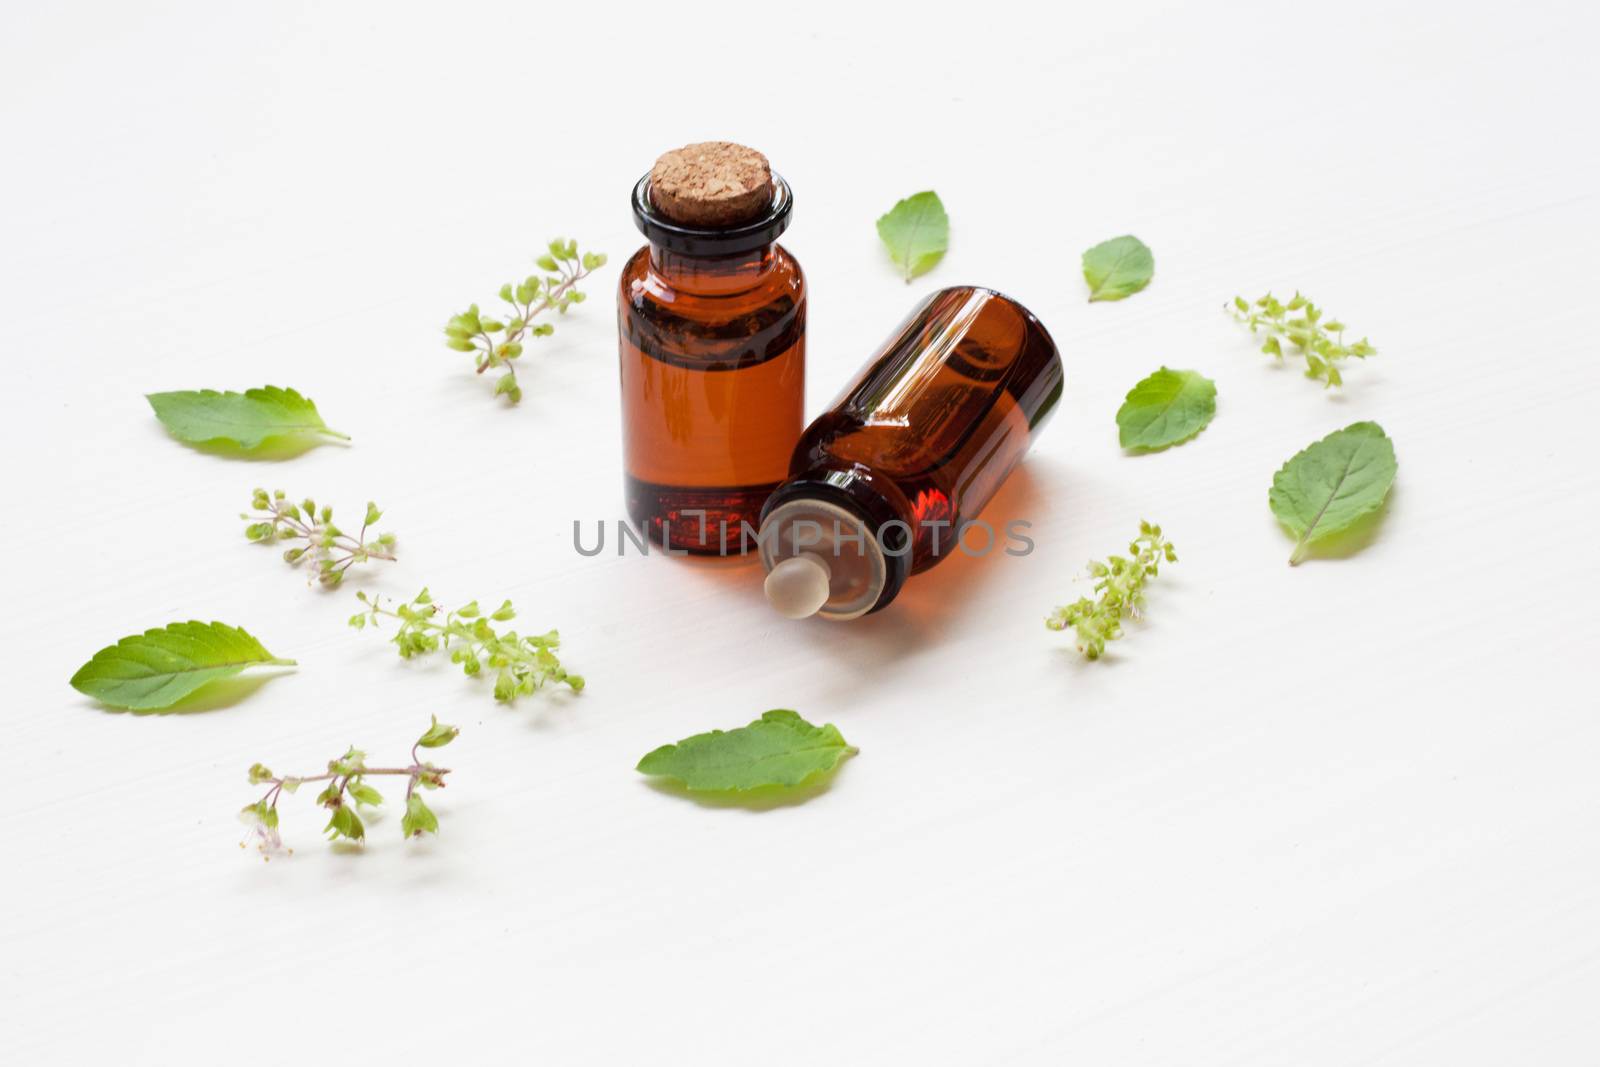 Holy Basil Essential Oil in a Glass Bottle with Fresh Holy Basil leaves and flower on white background.